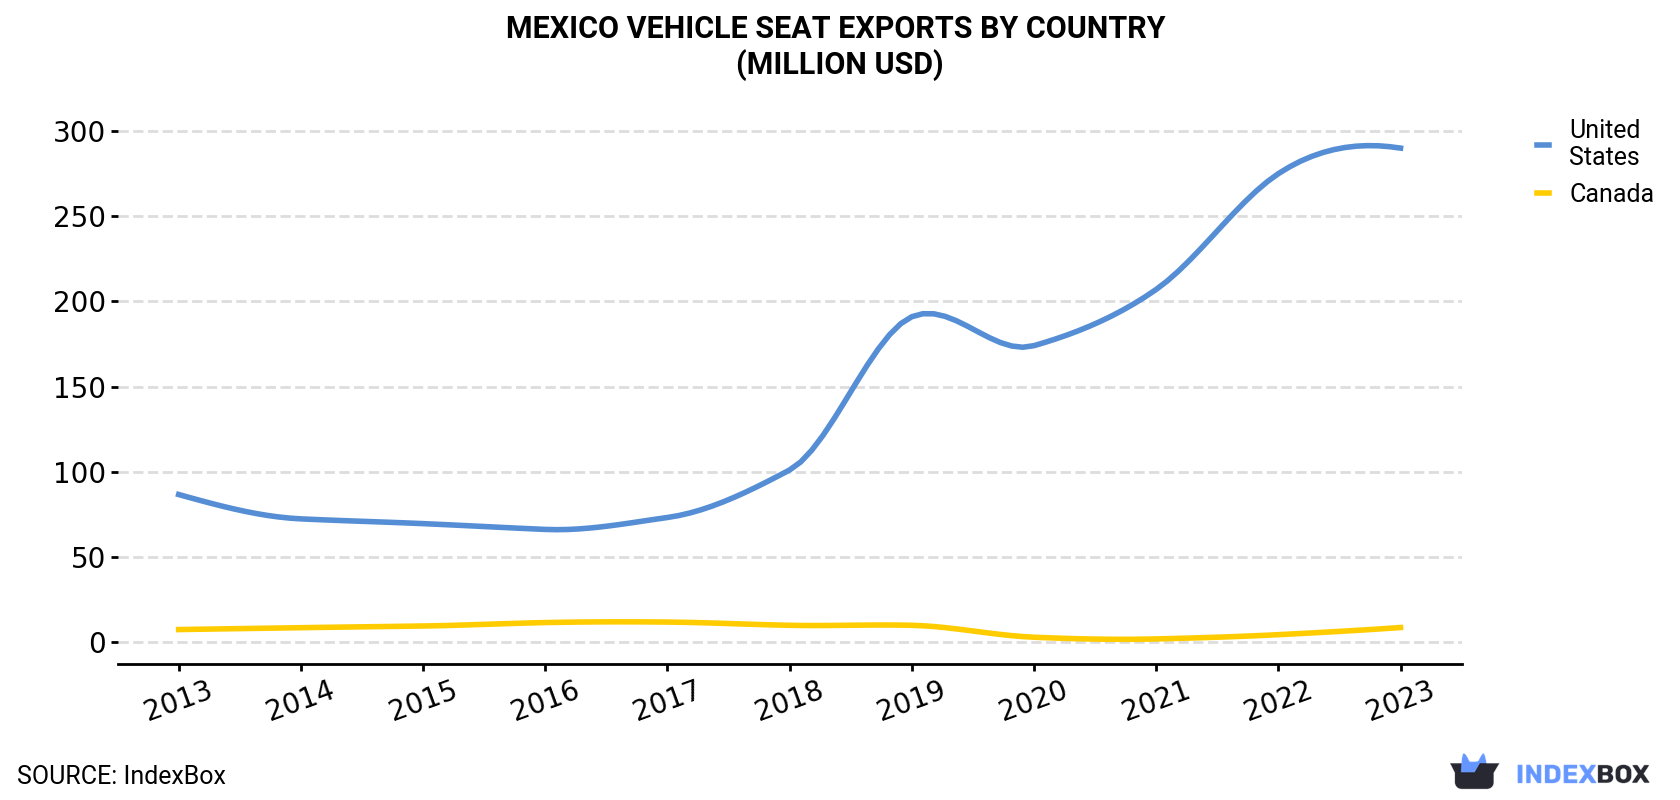 Mexico Vehicle Seat Exports By Country (Million USD)